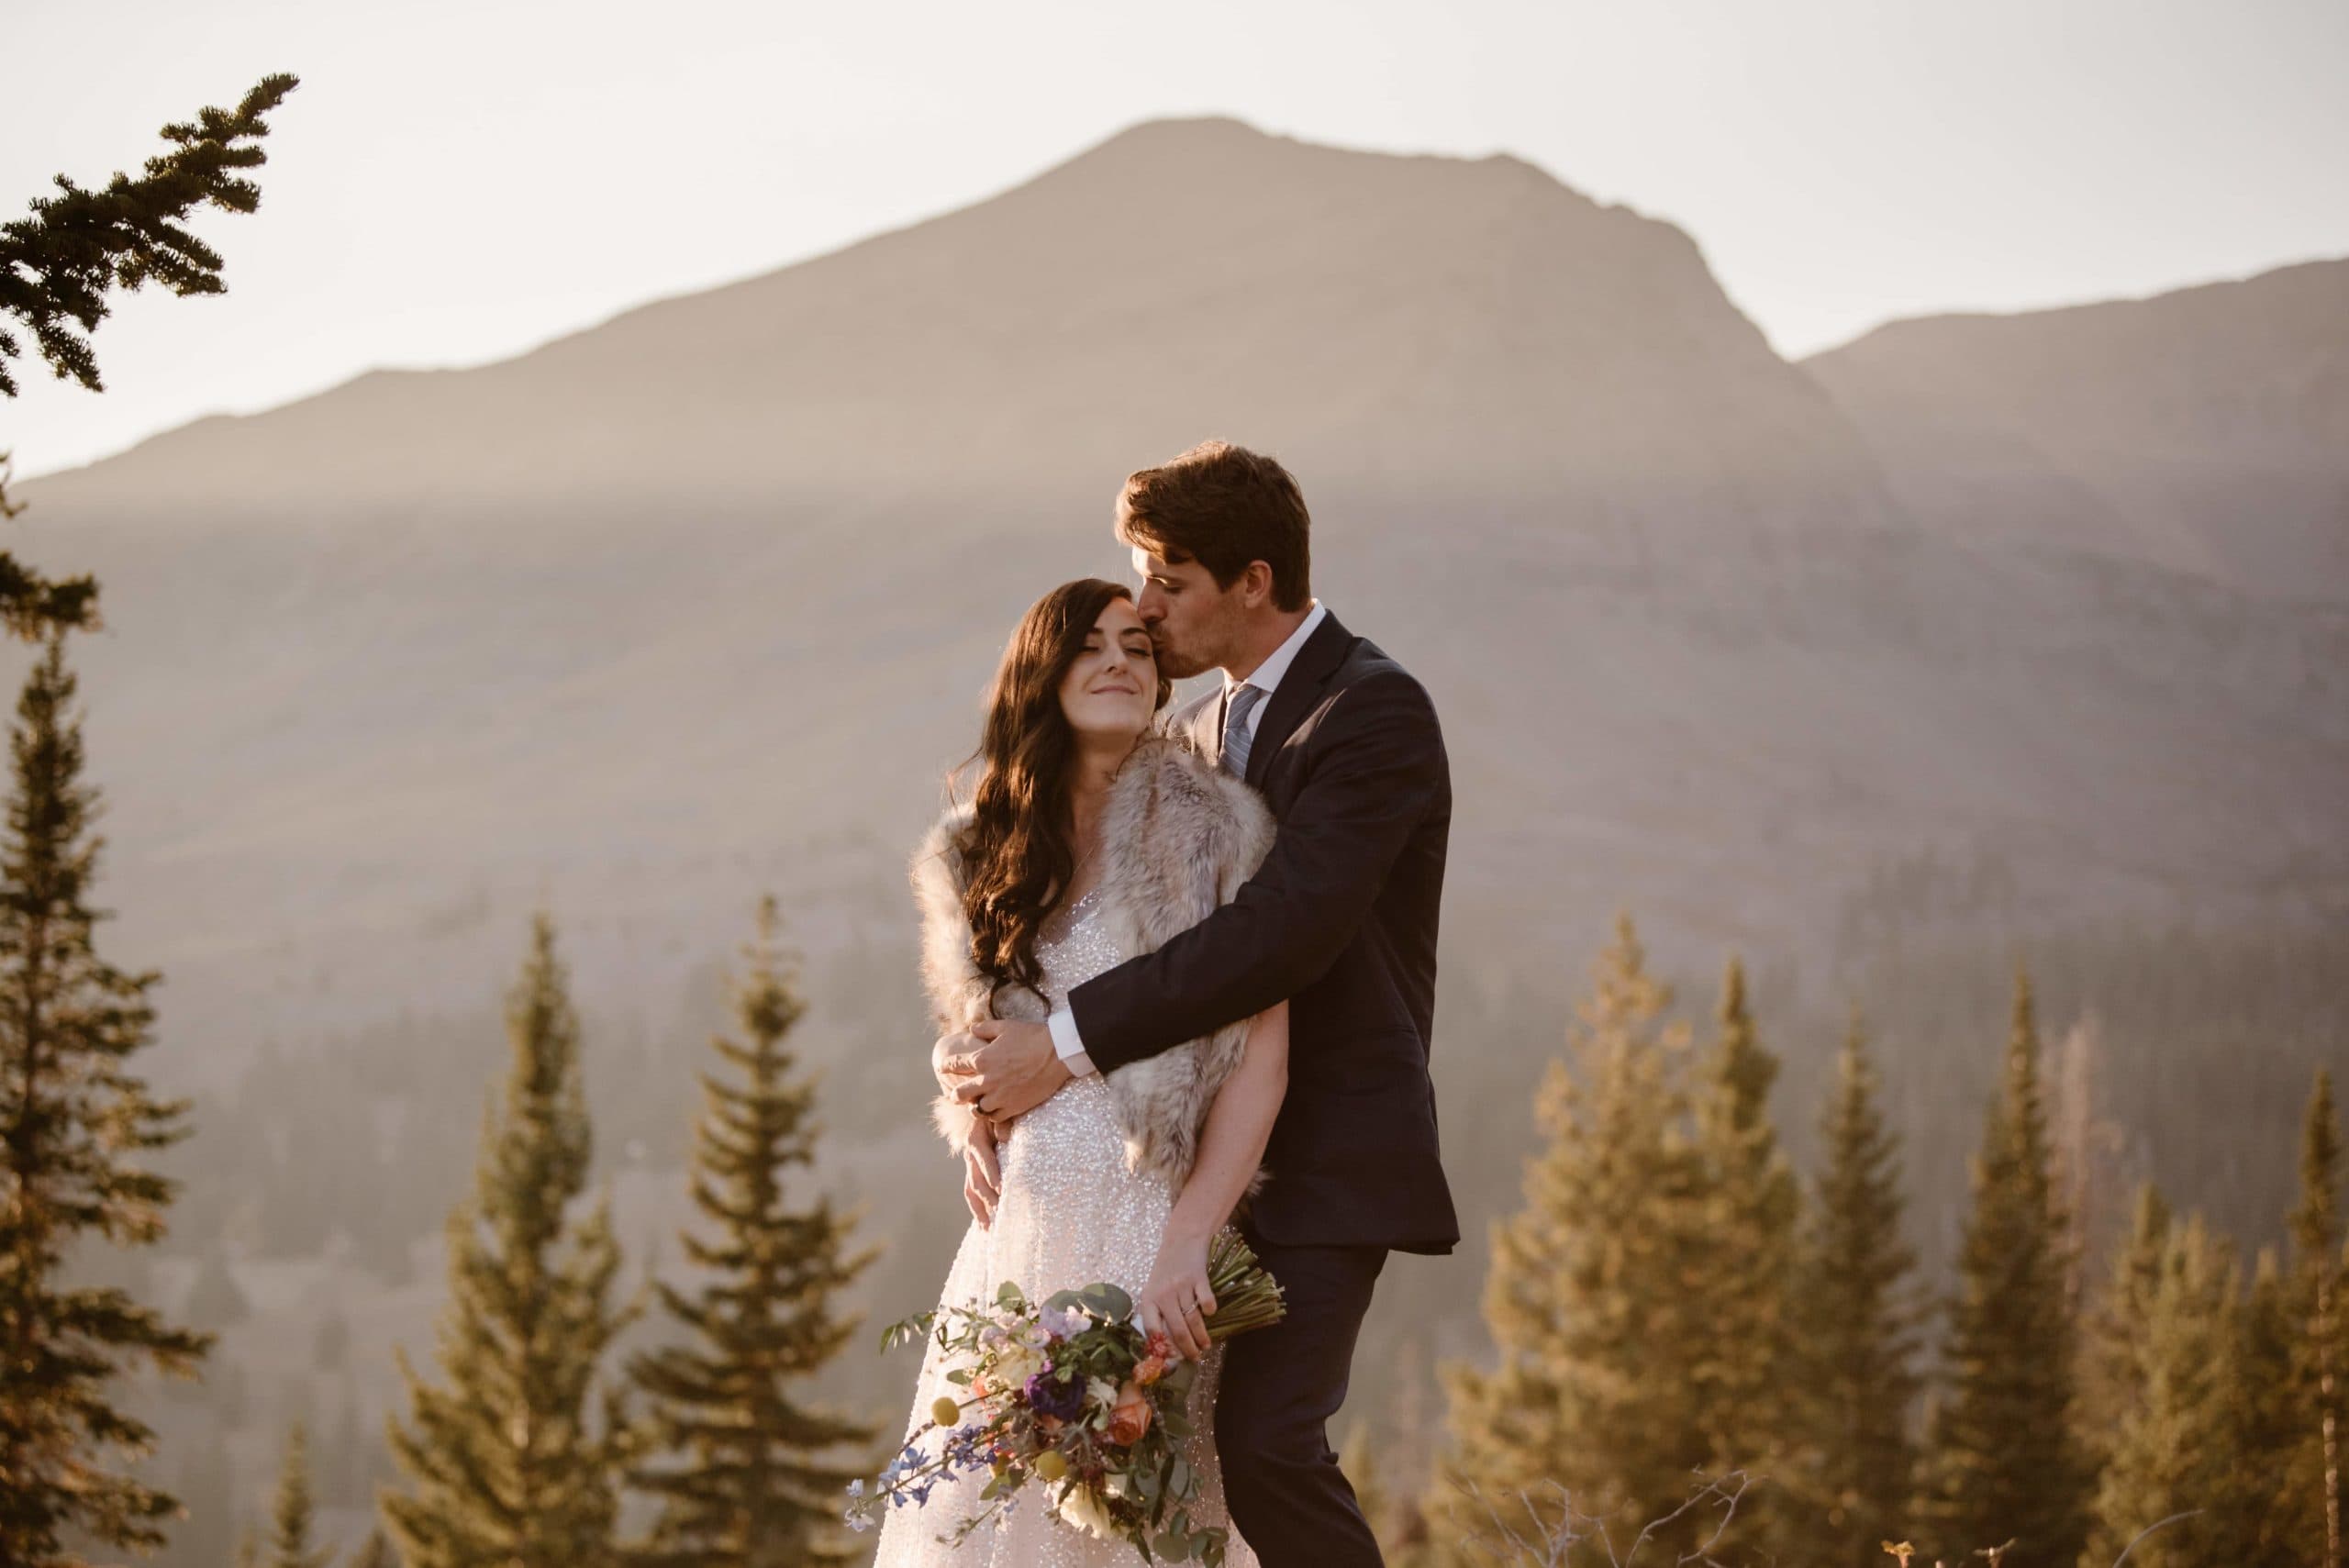 Bride and groom embrace on their elopement day in Crested Butte, Colorado. Groom kisses bride on the forehead. There are trees and mountains in the background. 